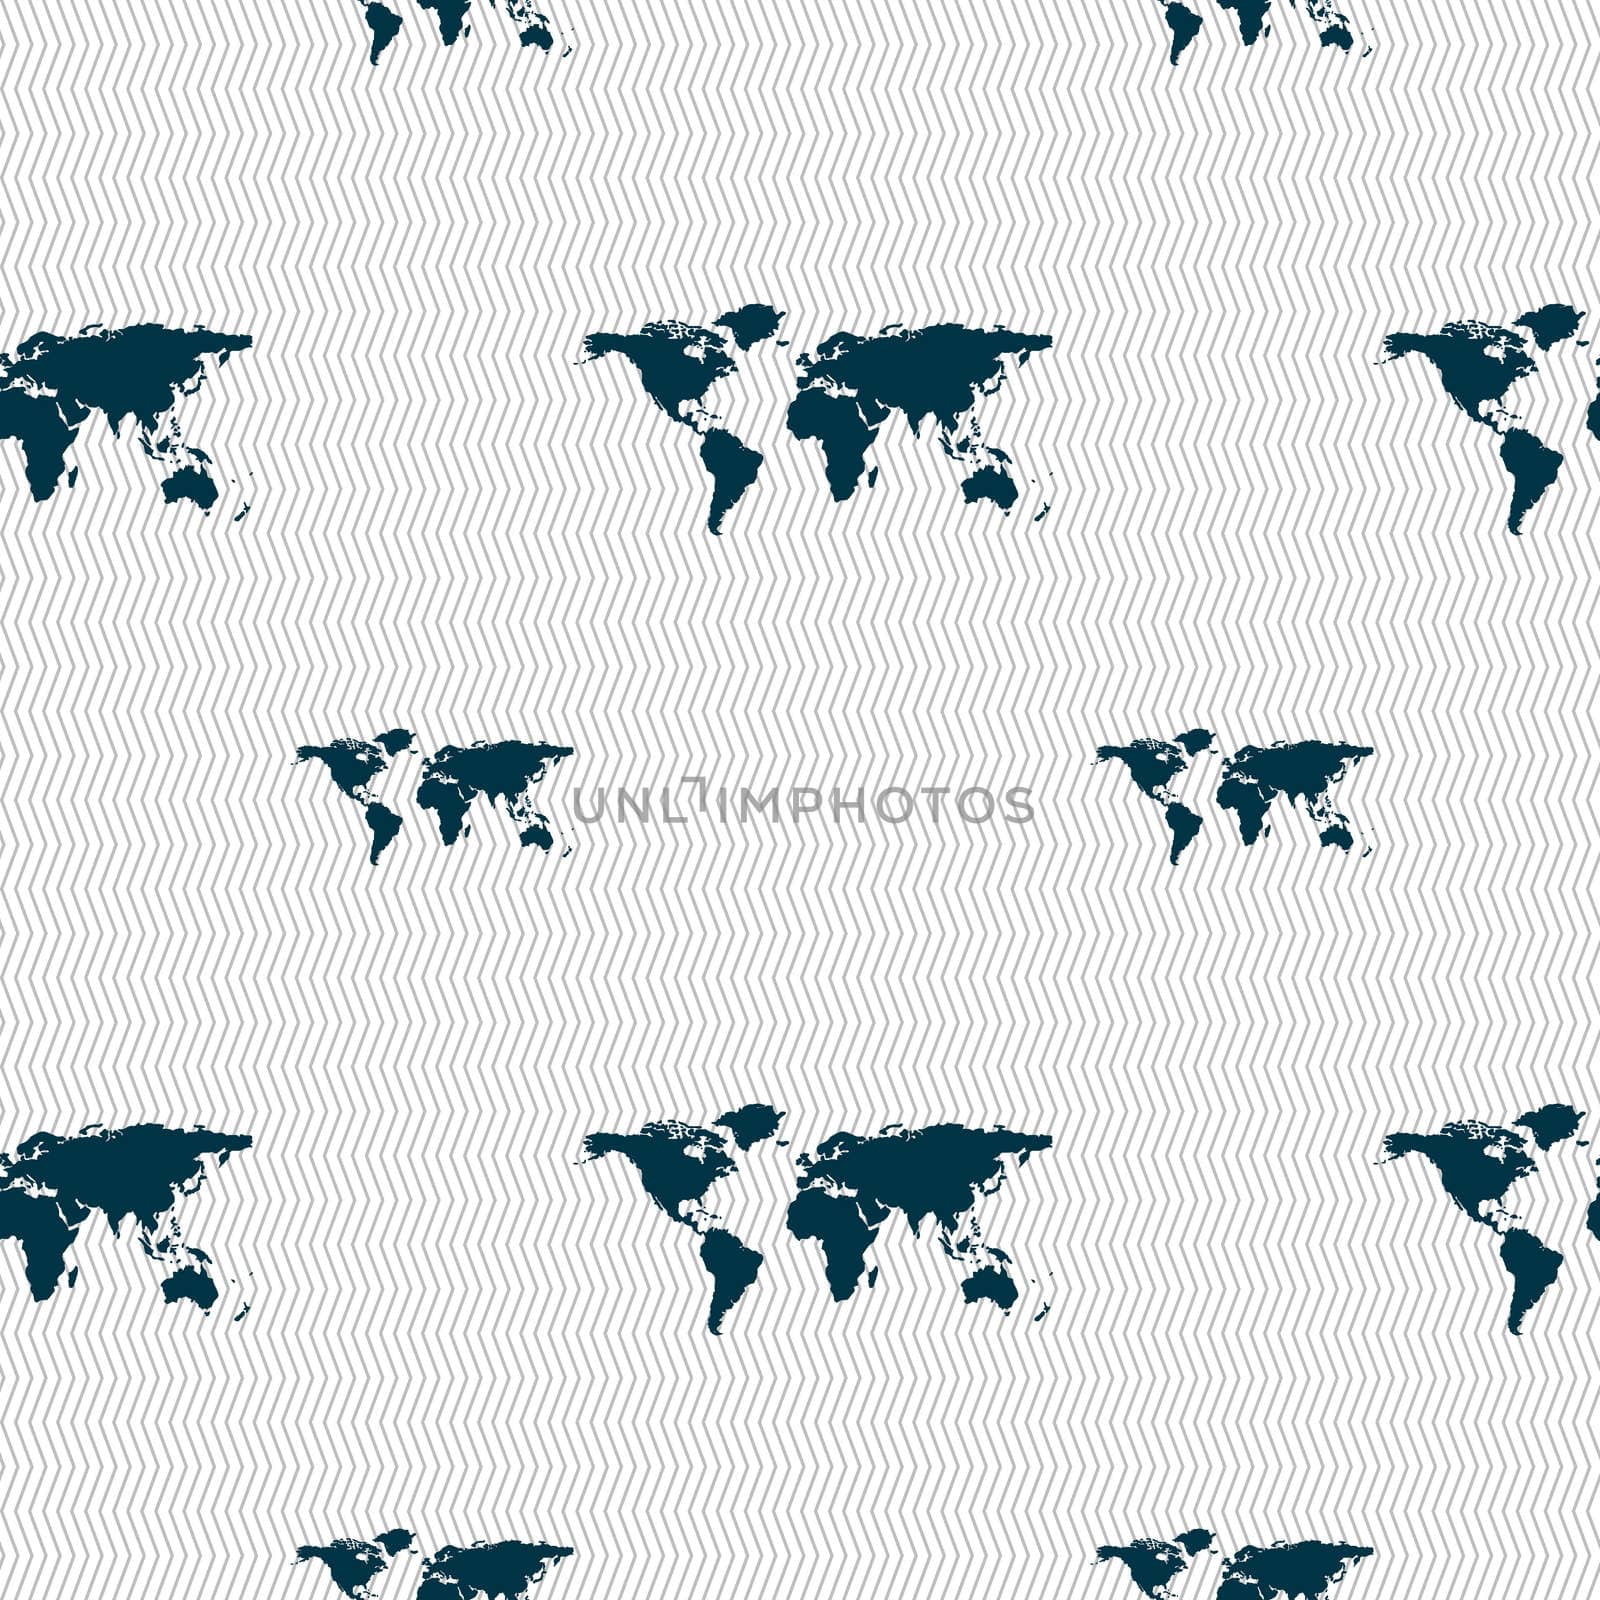 Globe sign icon. World map geography symbol. Seamless pattern with geometric texture. illustration